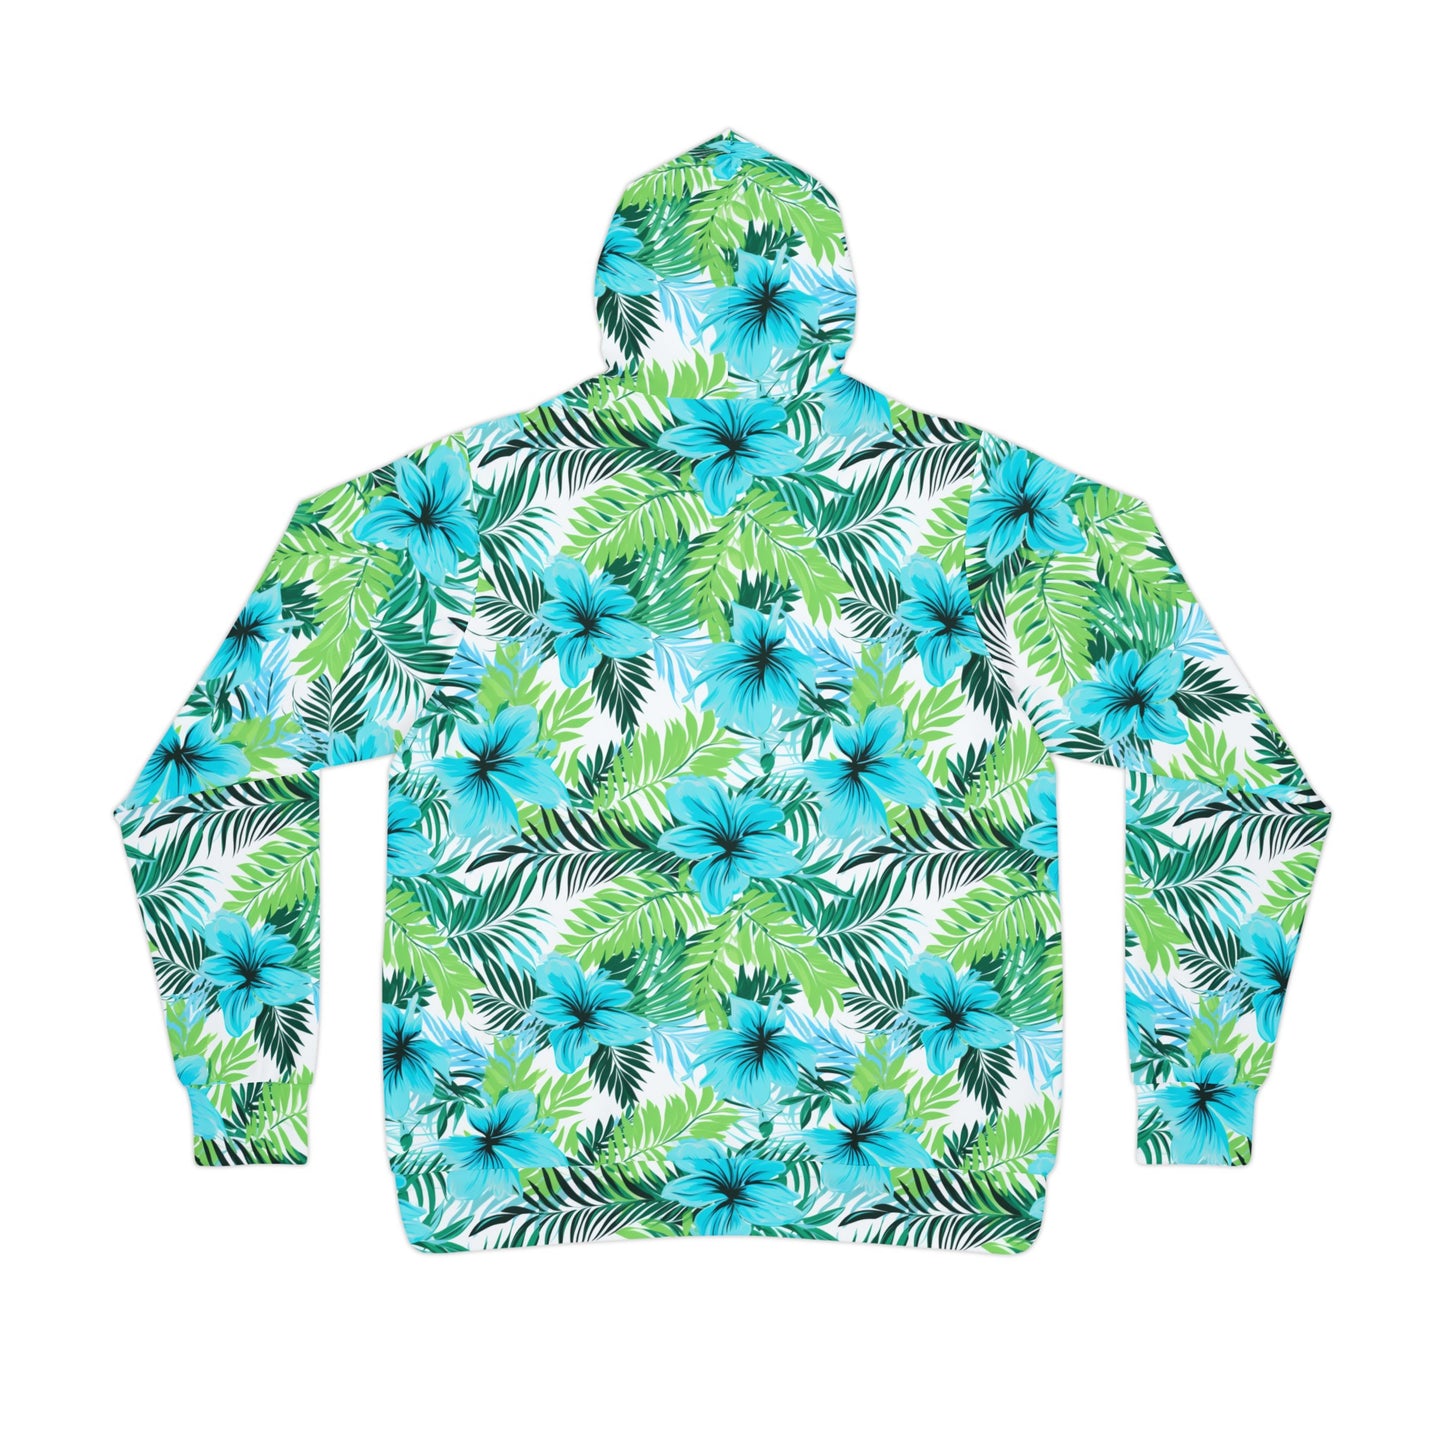 Mascot Surface Beach Volleyball Club Sublimated Designer Athletic Hoodie